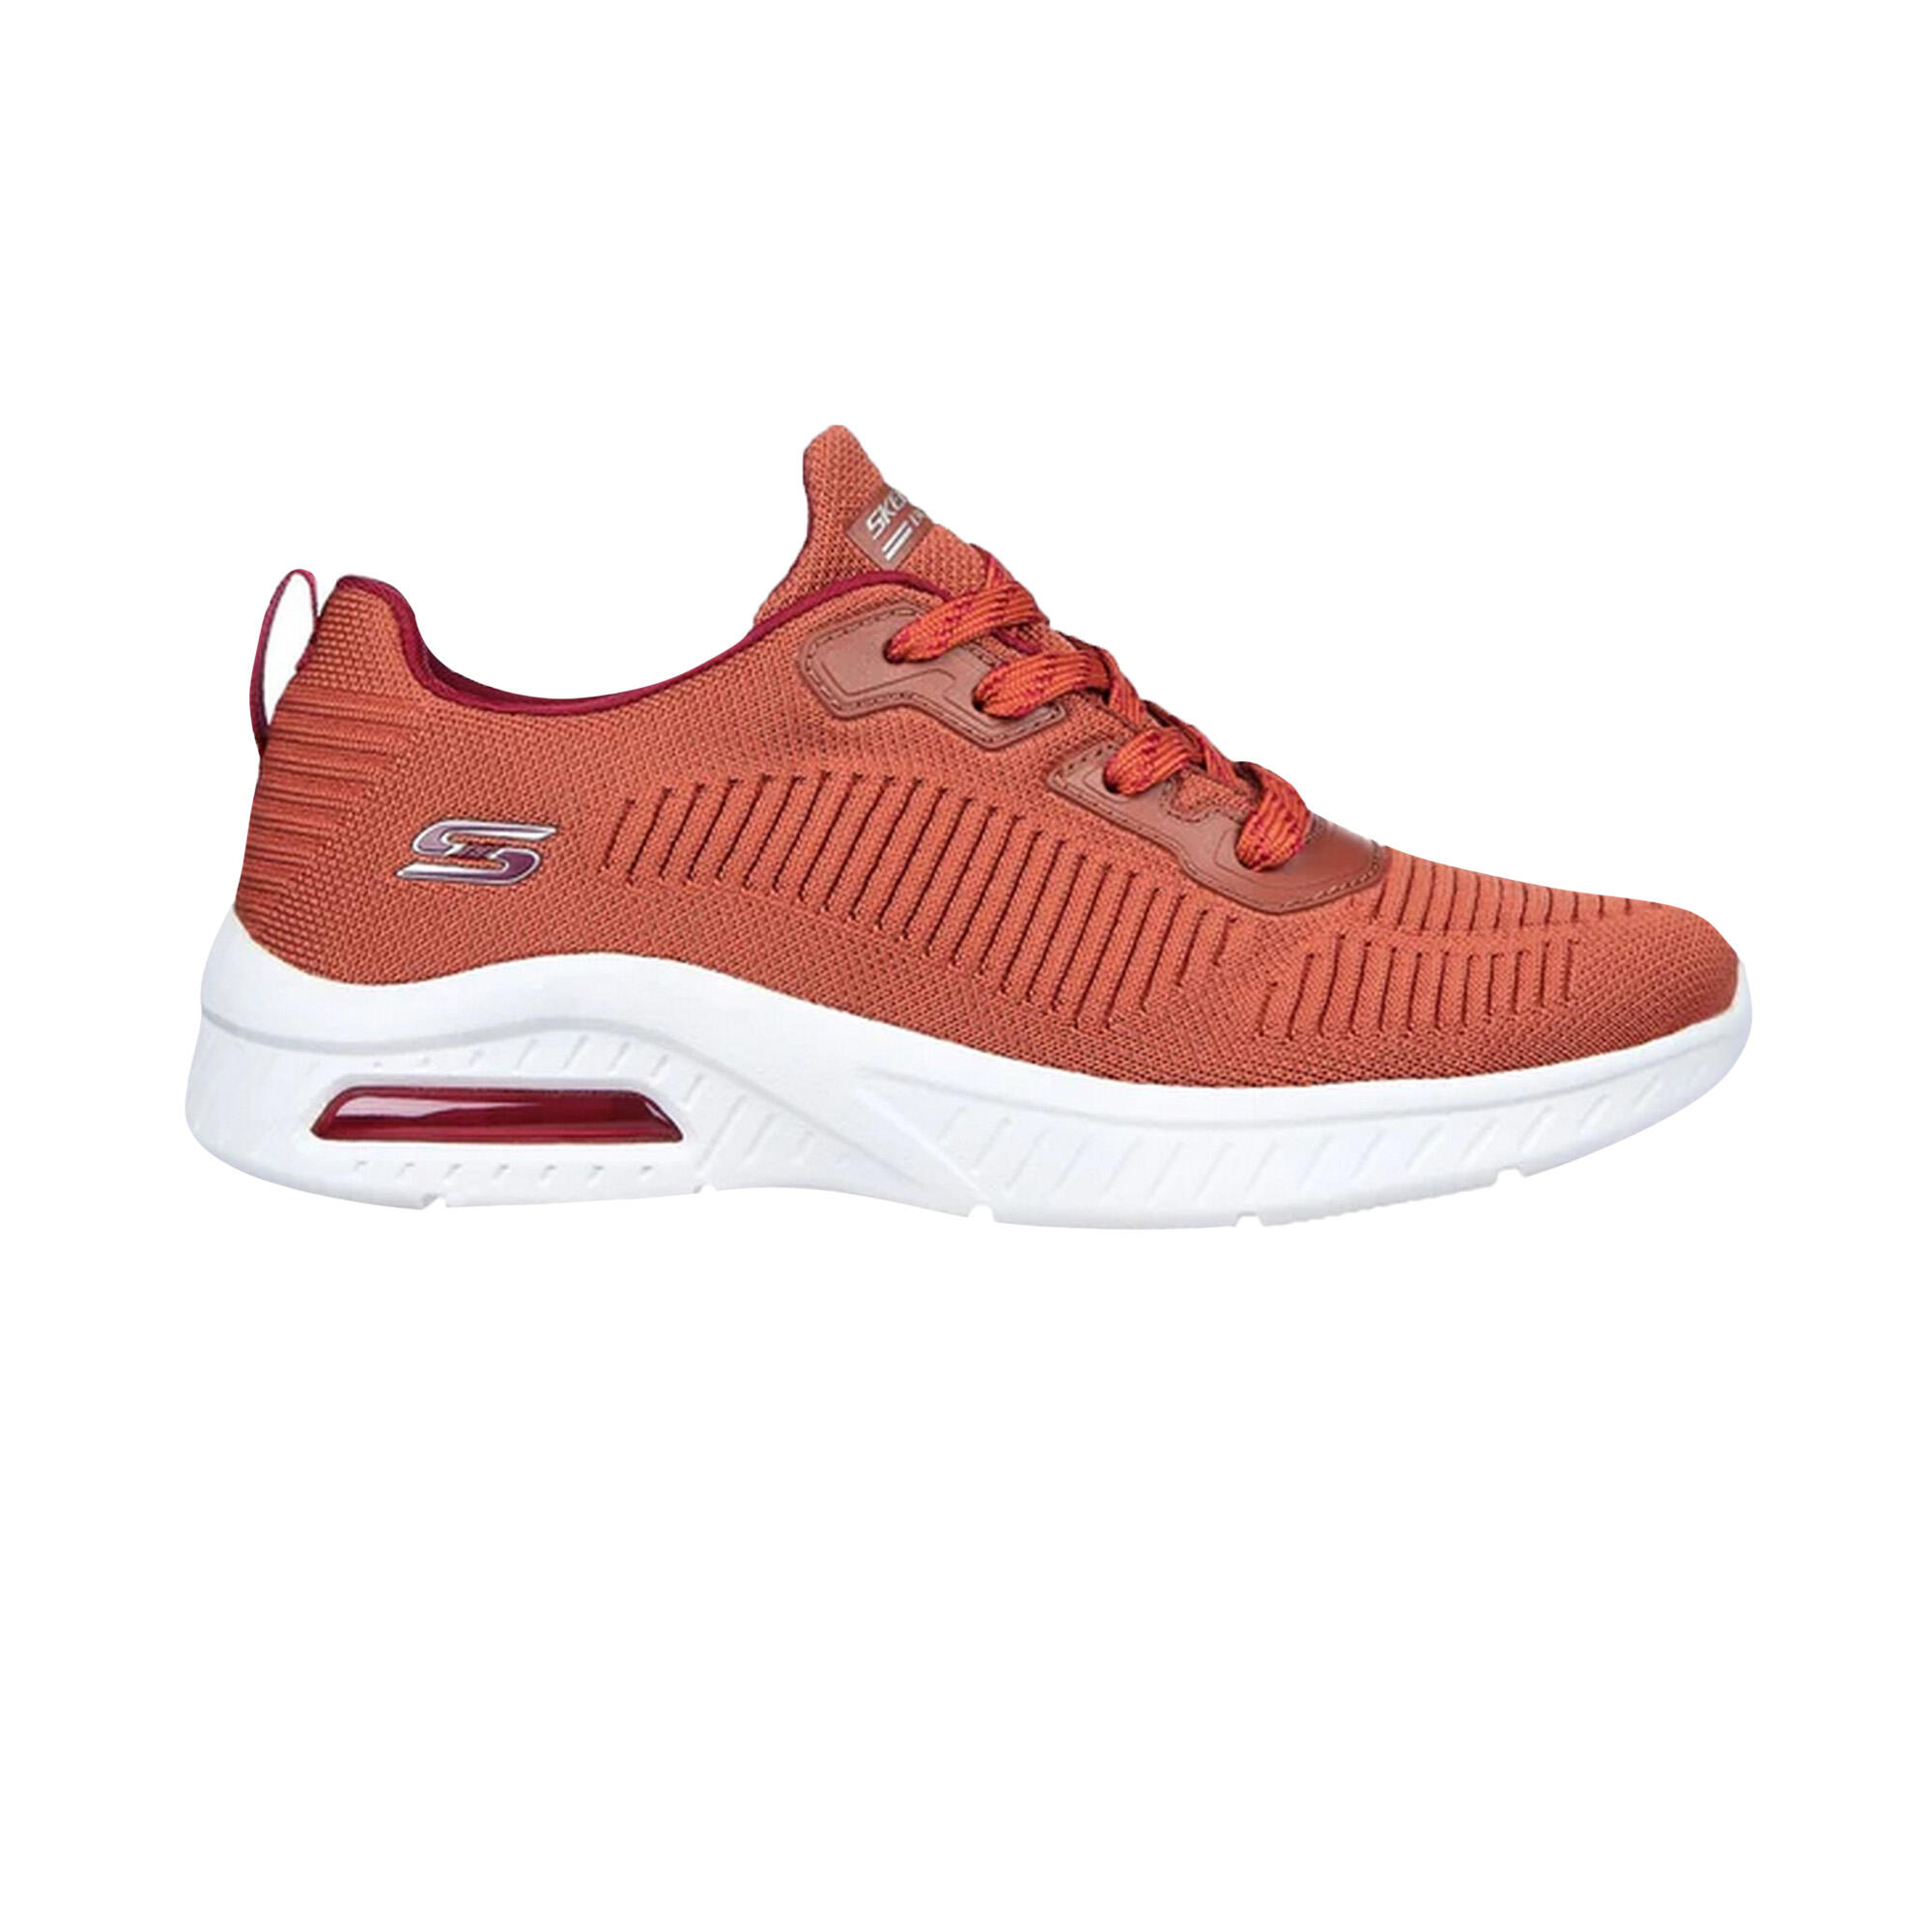 Womens/Ladies Bobs Squad Air Sweet Encounter Trainers (Rust) 3/5